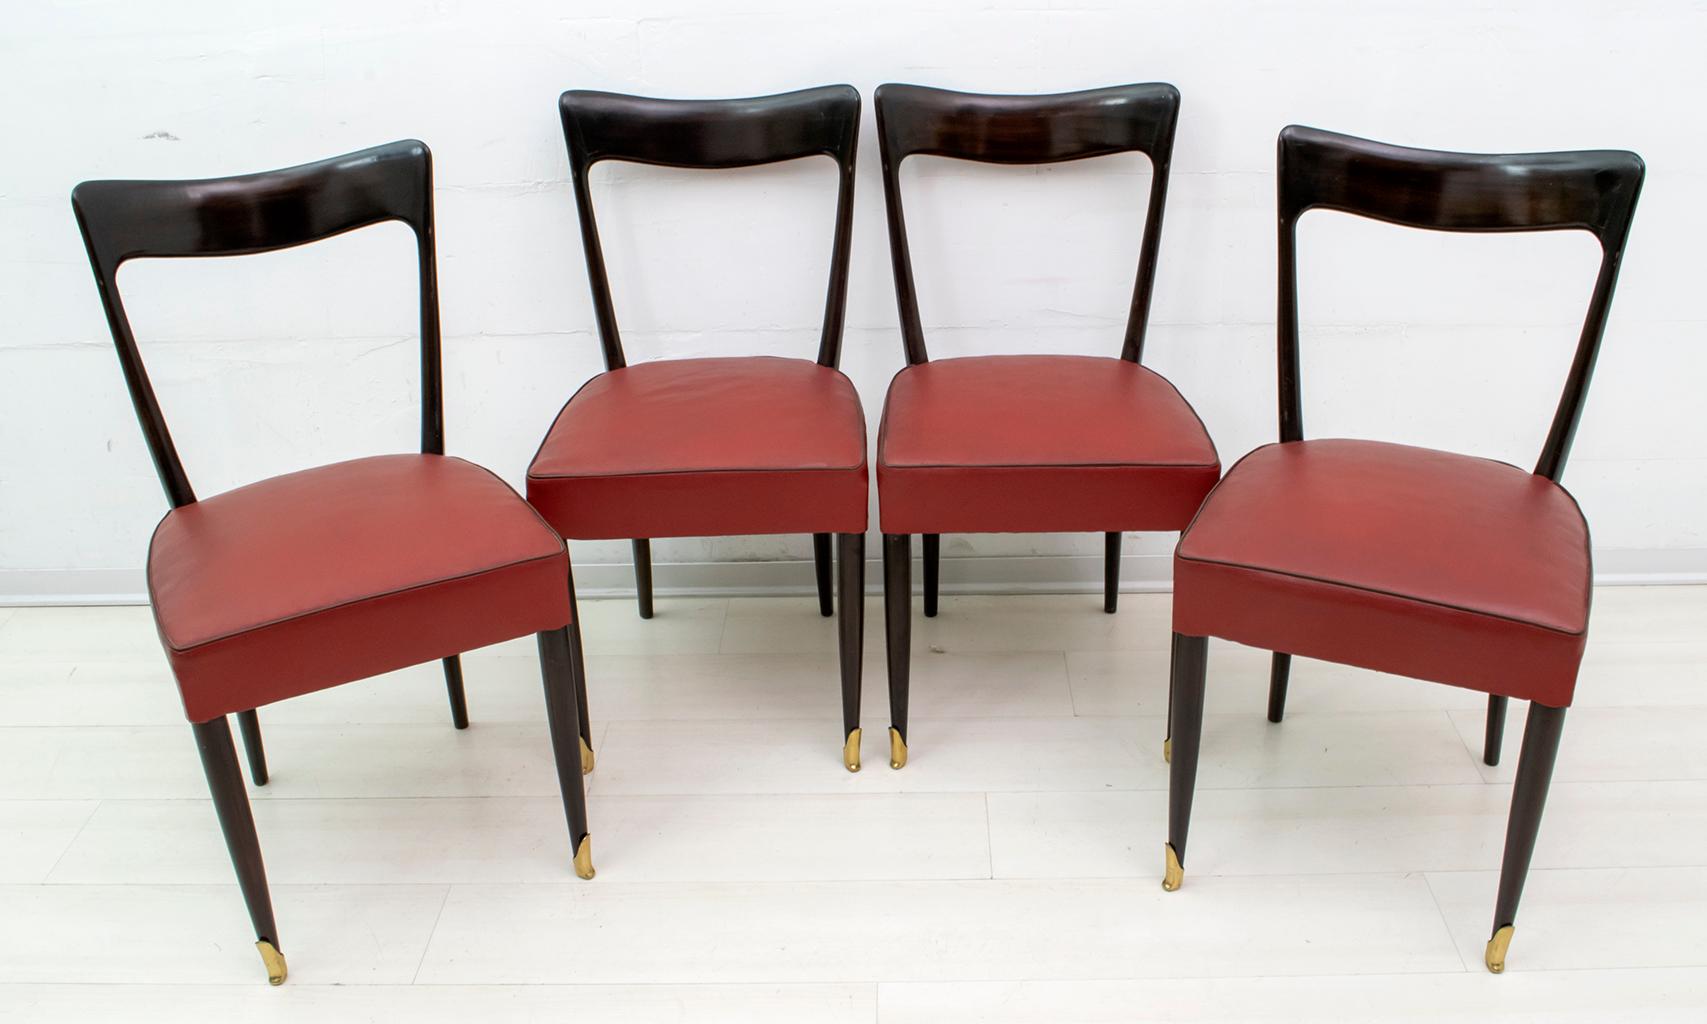 Four chairs designed by the well-known designer Guglielmo Ulrich and produced by Arredamenti Casa between the 1940s and 1950s. The eco-leather upholstery is original of the time, in excellent condition, does not require any restoration.

In 1930